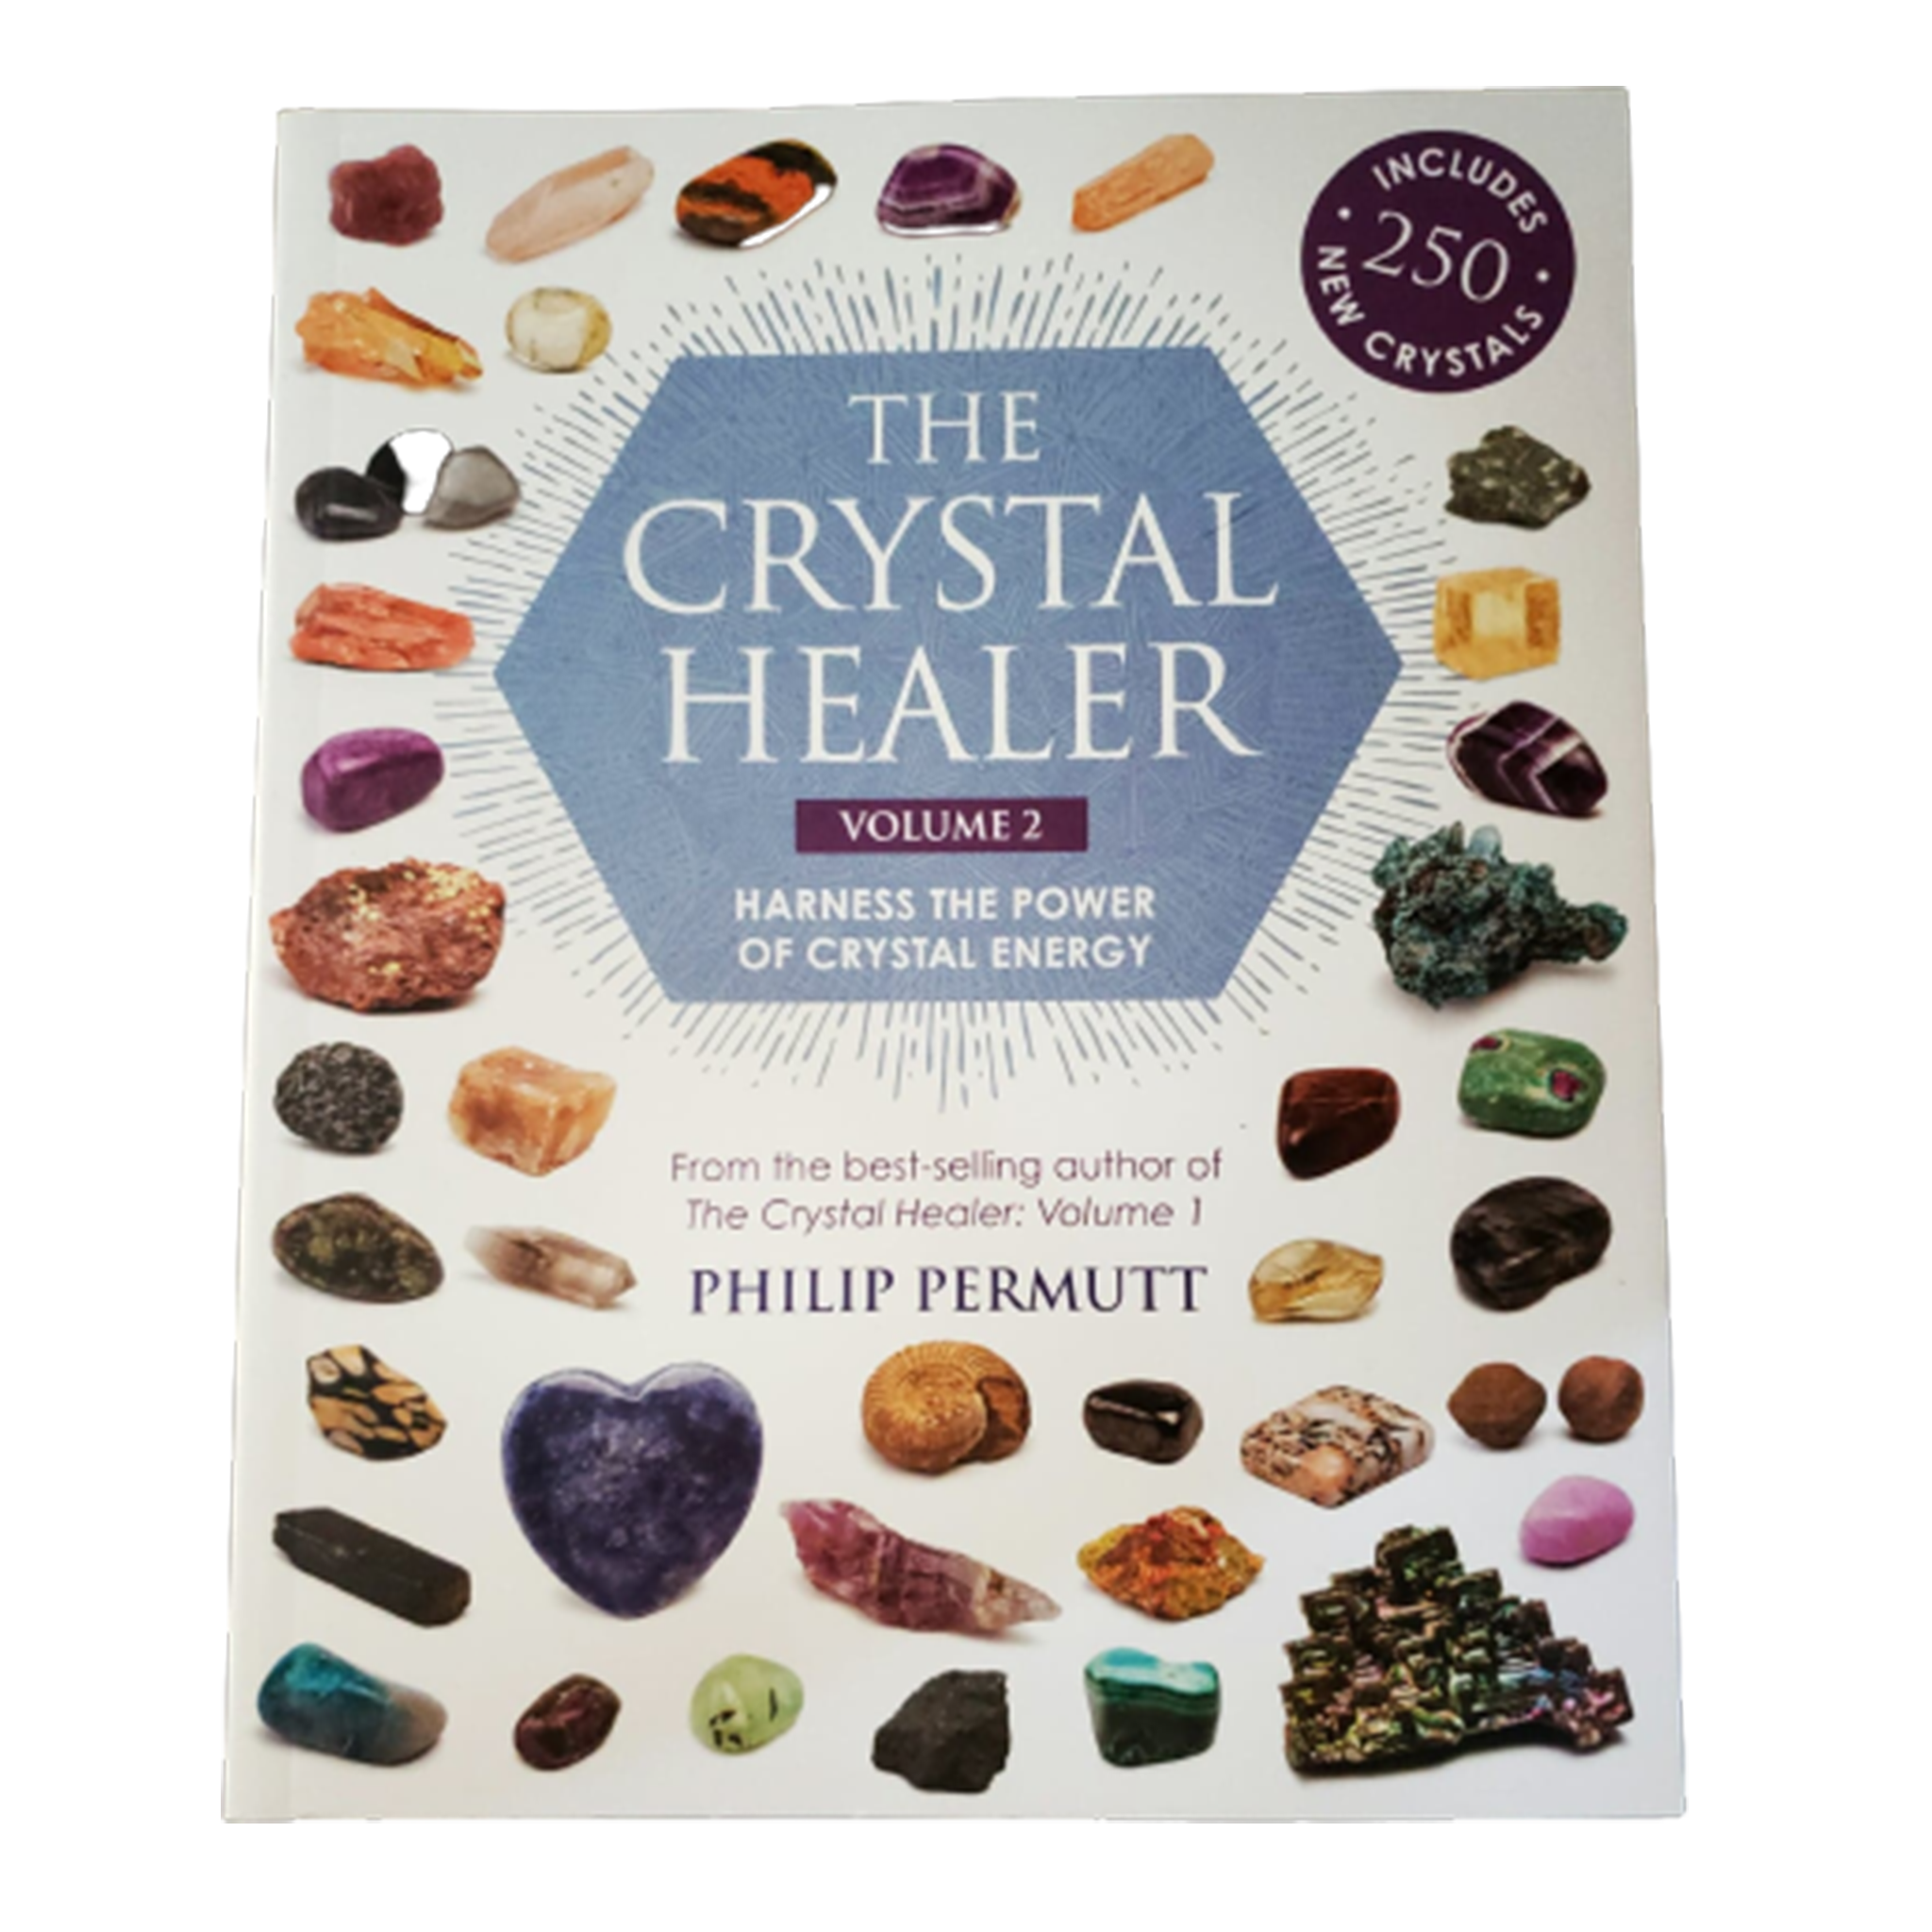 The Crystal Healer Vol. 2 By Philip Permutt